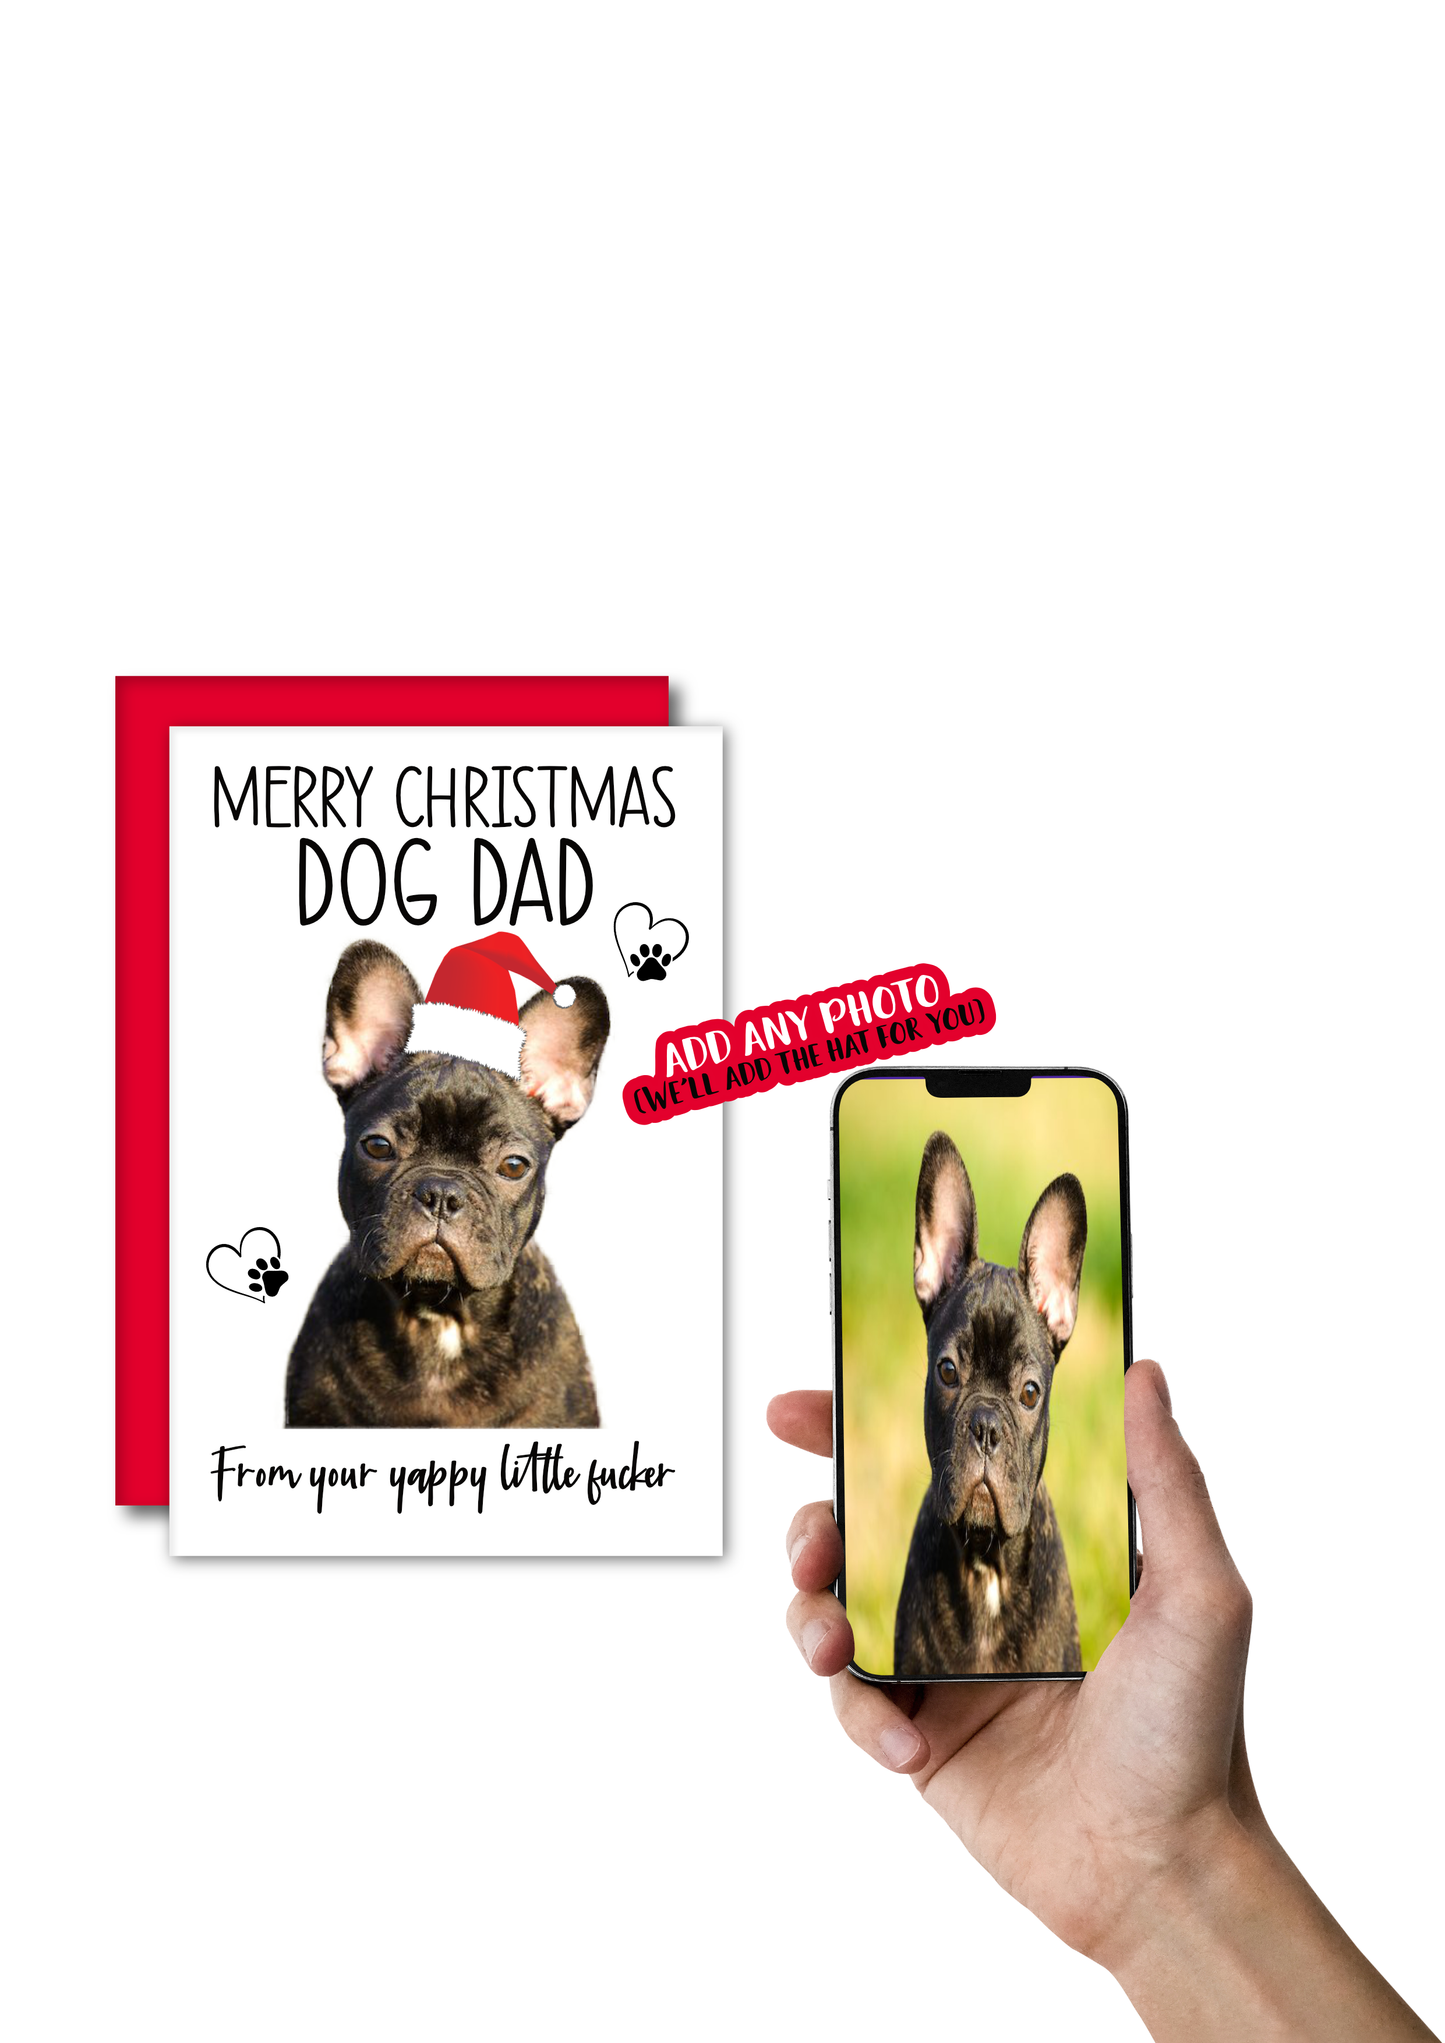 Card - Merry Christmas dog dad (add any photo)